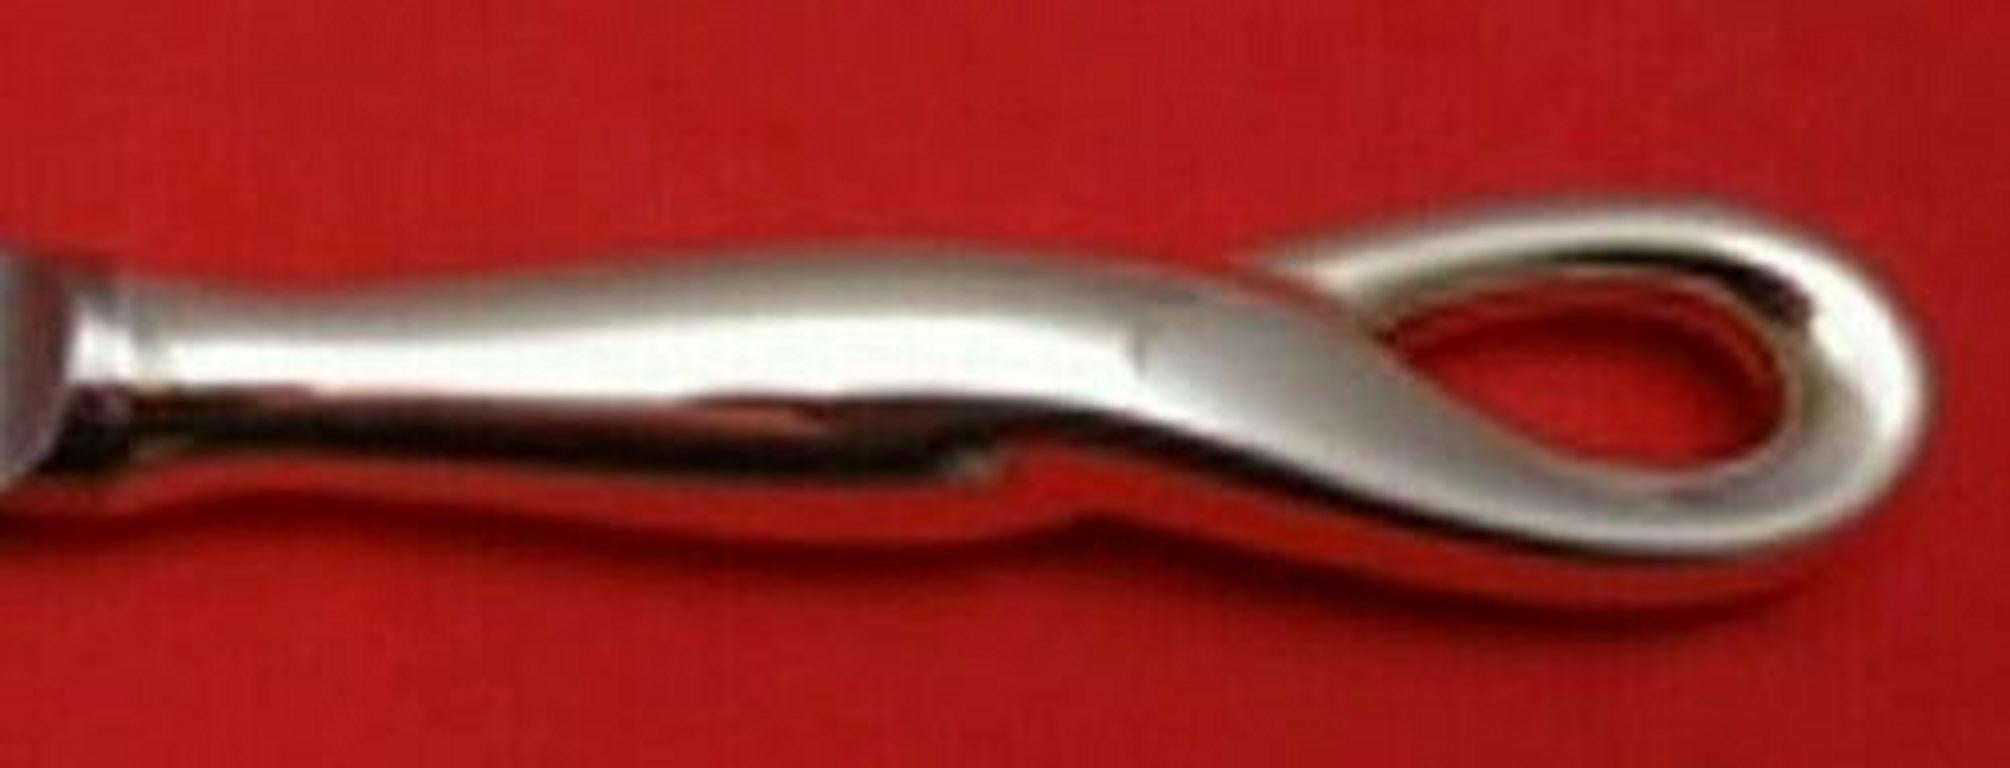 Sterling silver hollow handle with stainless French blade dessert knife 7 3/8